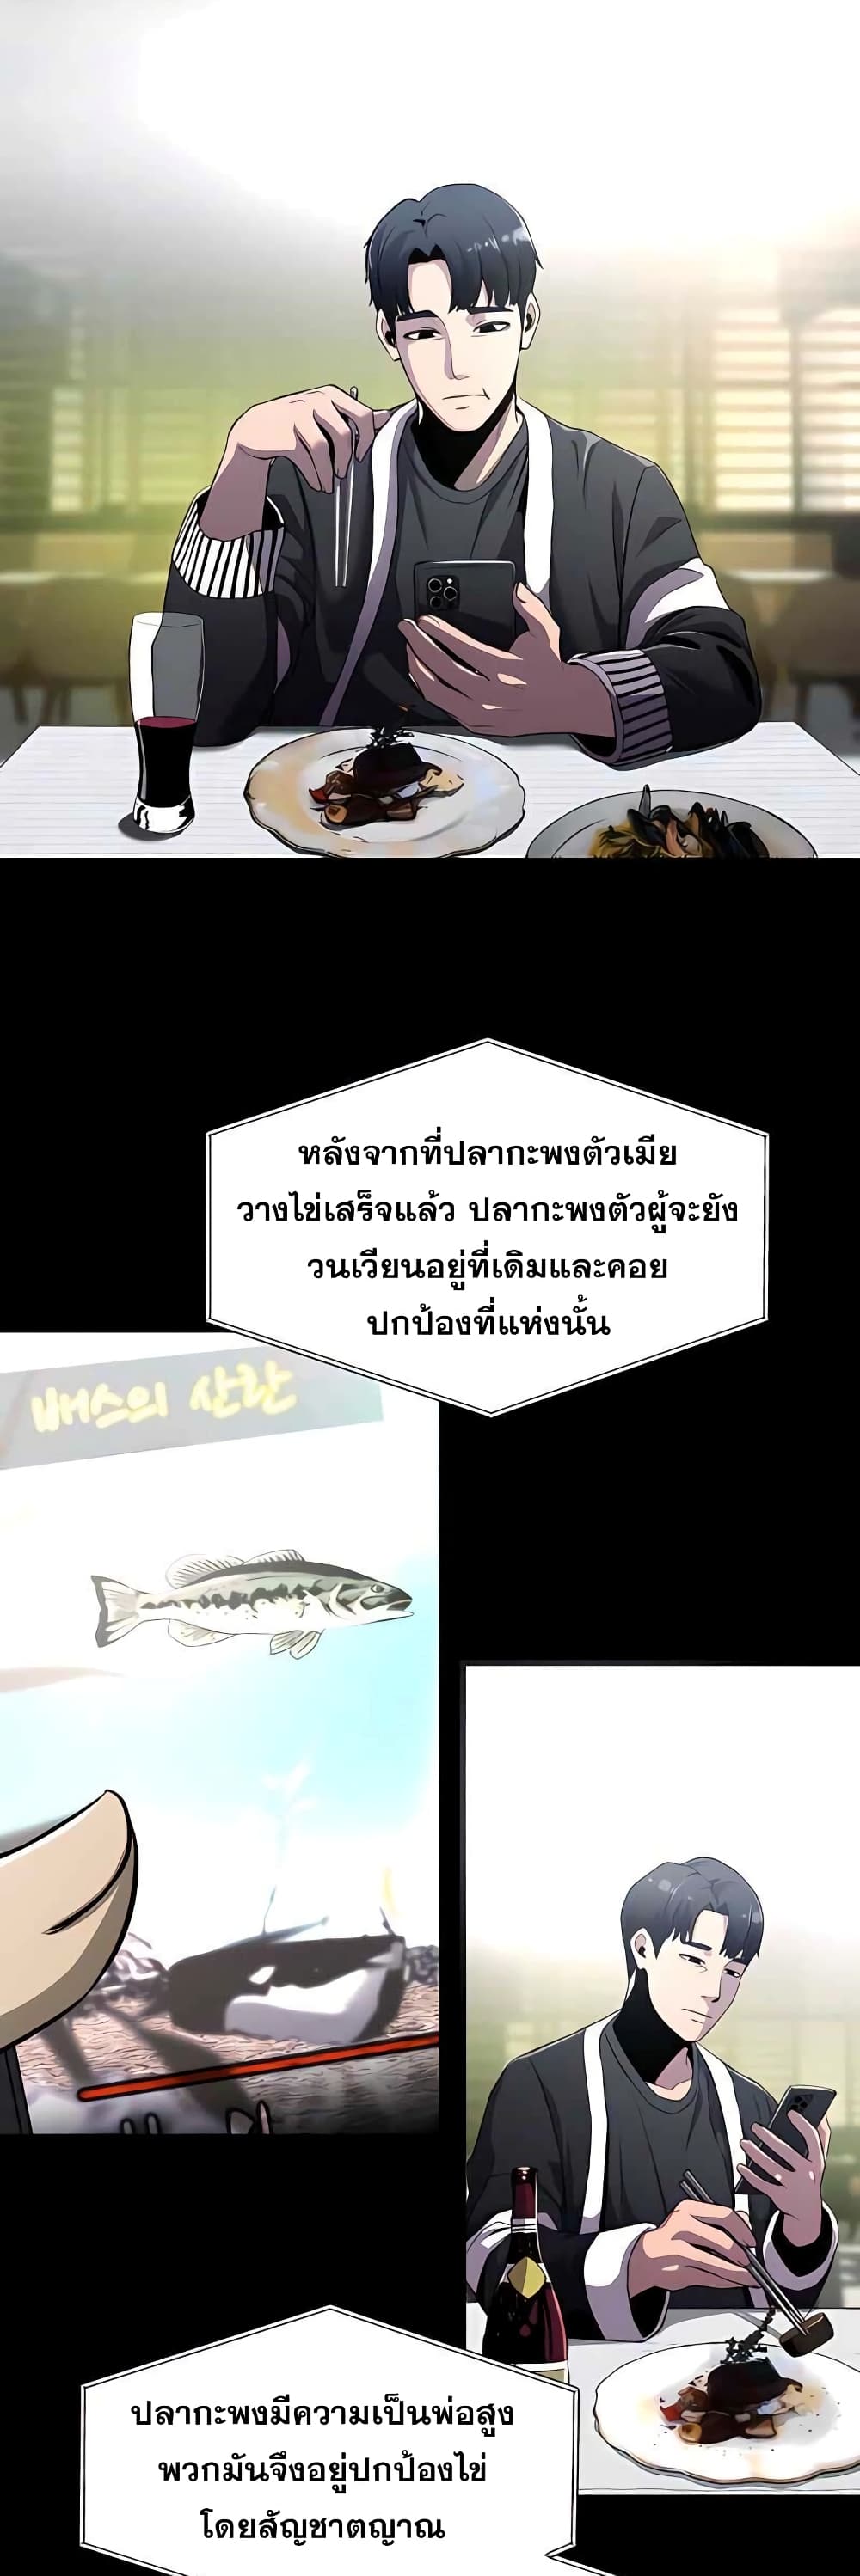 Surviving As a Fish - หน้า 11